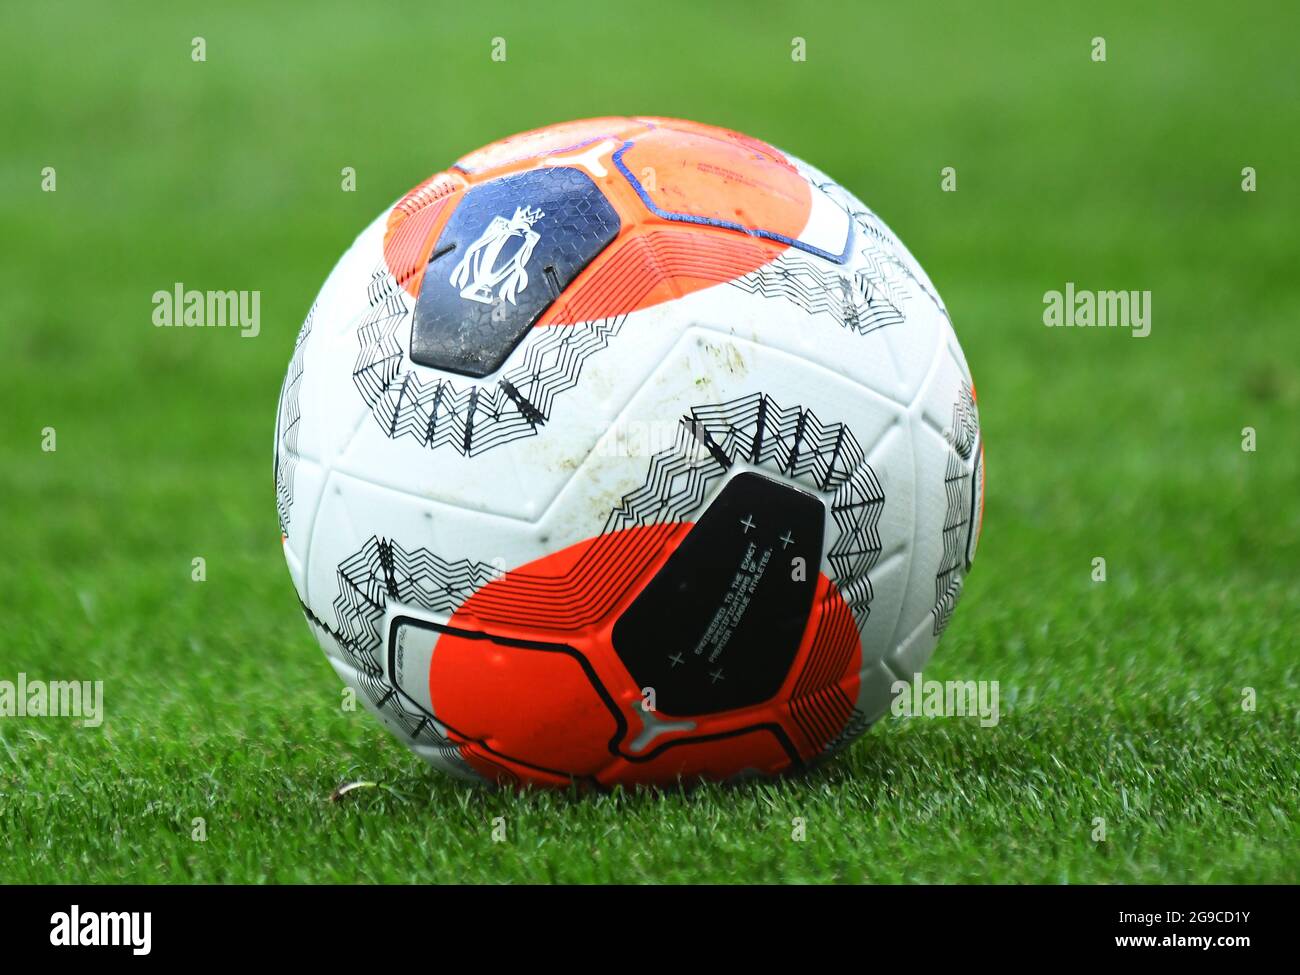 LONDON, ENGLAND - MArch 1, 2020: The official match ball pictured during the 2020/21 Premier League game between Tottenham Hotspur FC and Wolverhampton FC at Tottenham Hotspur Stadium. Stock Photo